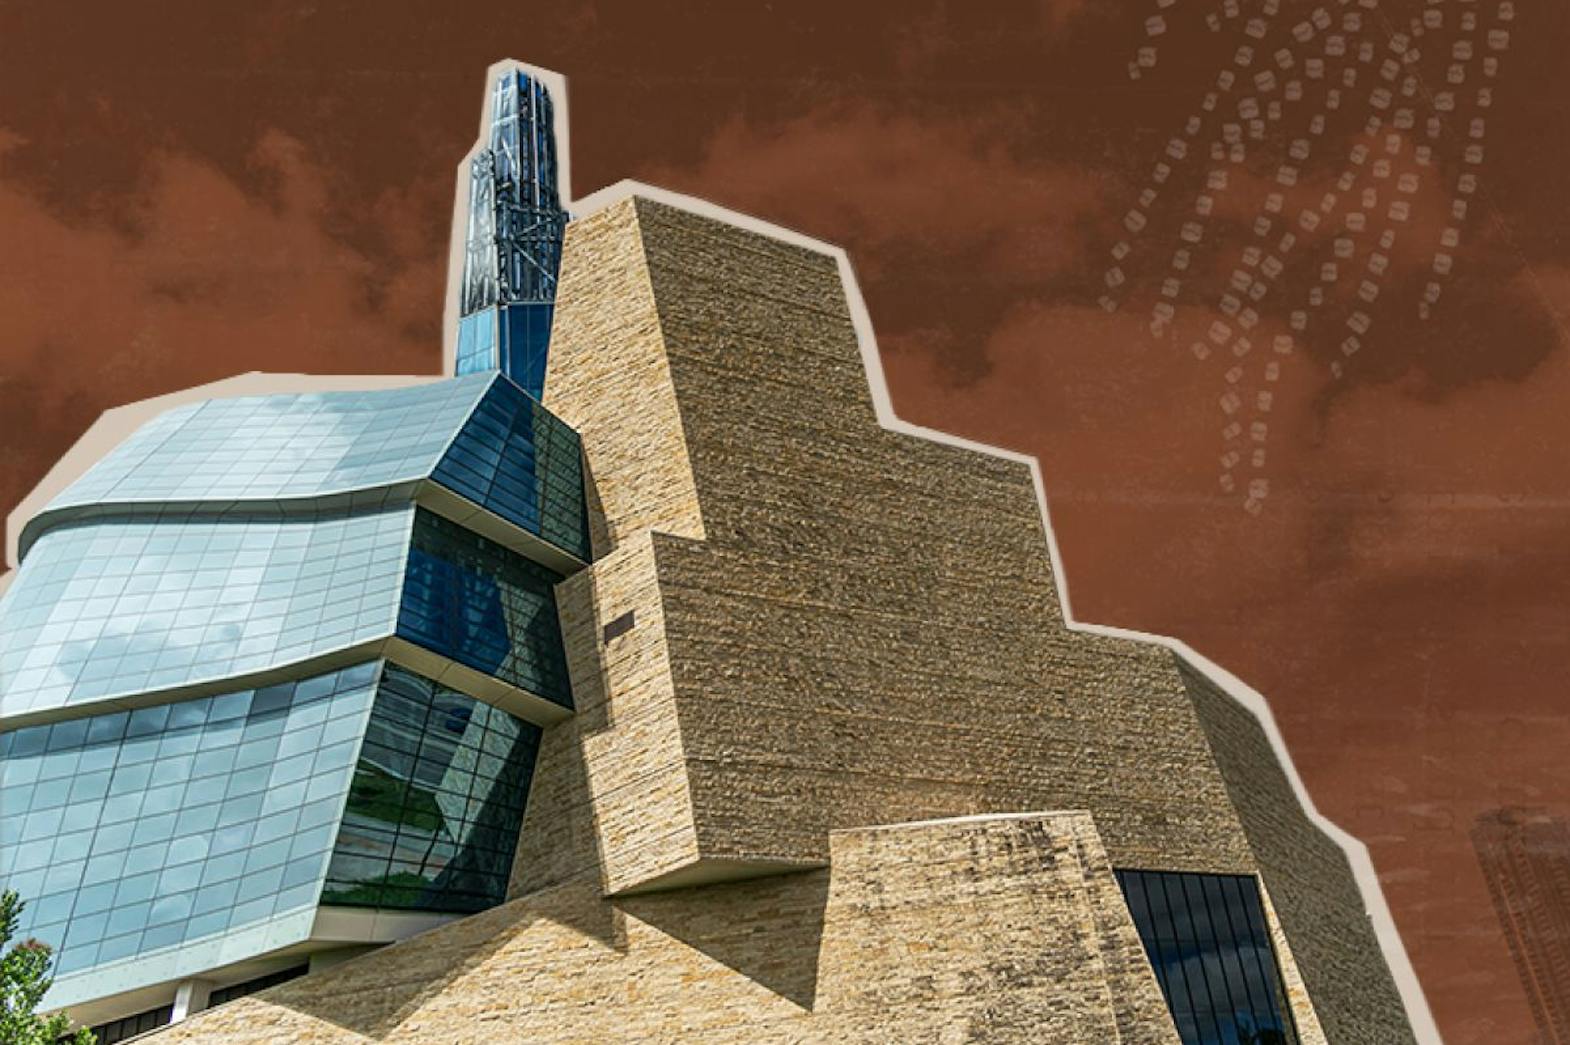 Upward angle of the Canadian Museum for Human Rights in Winnipeg